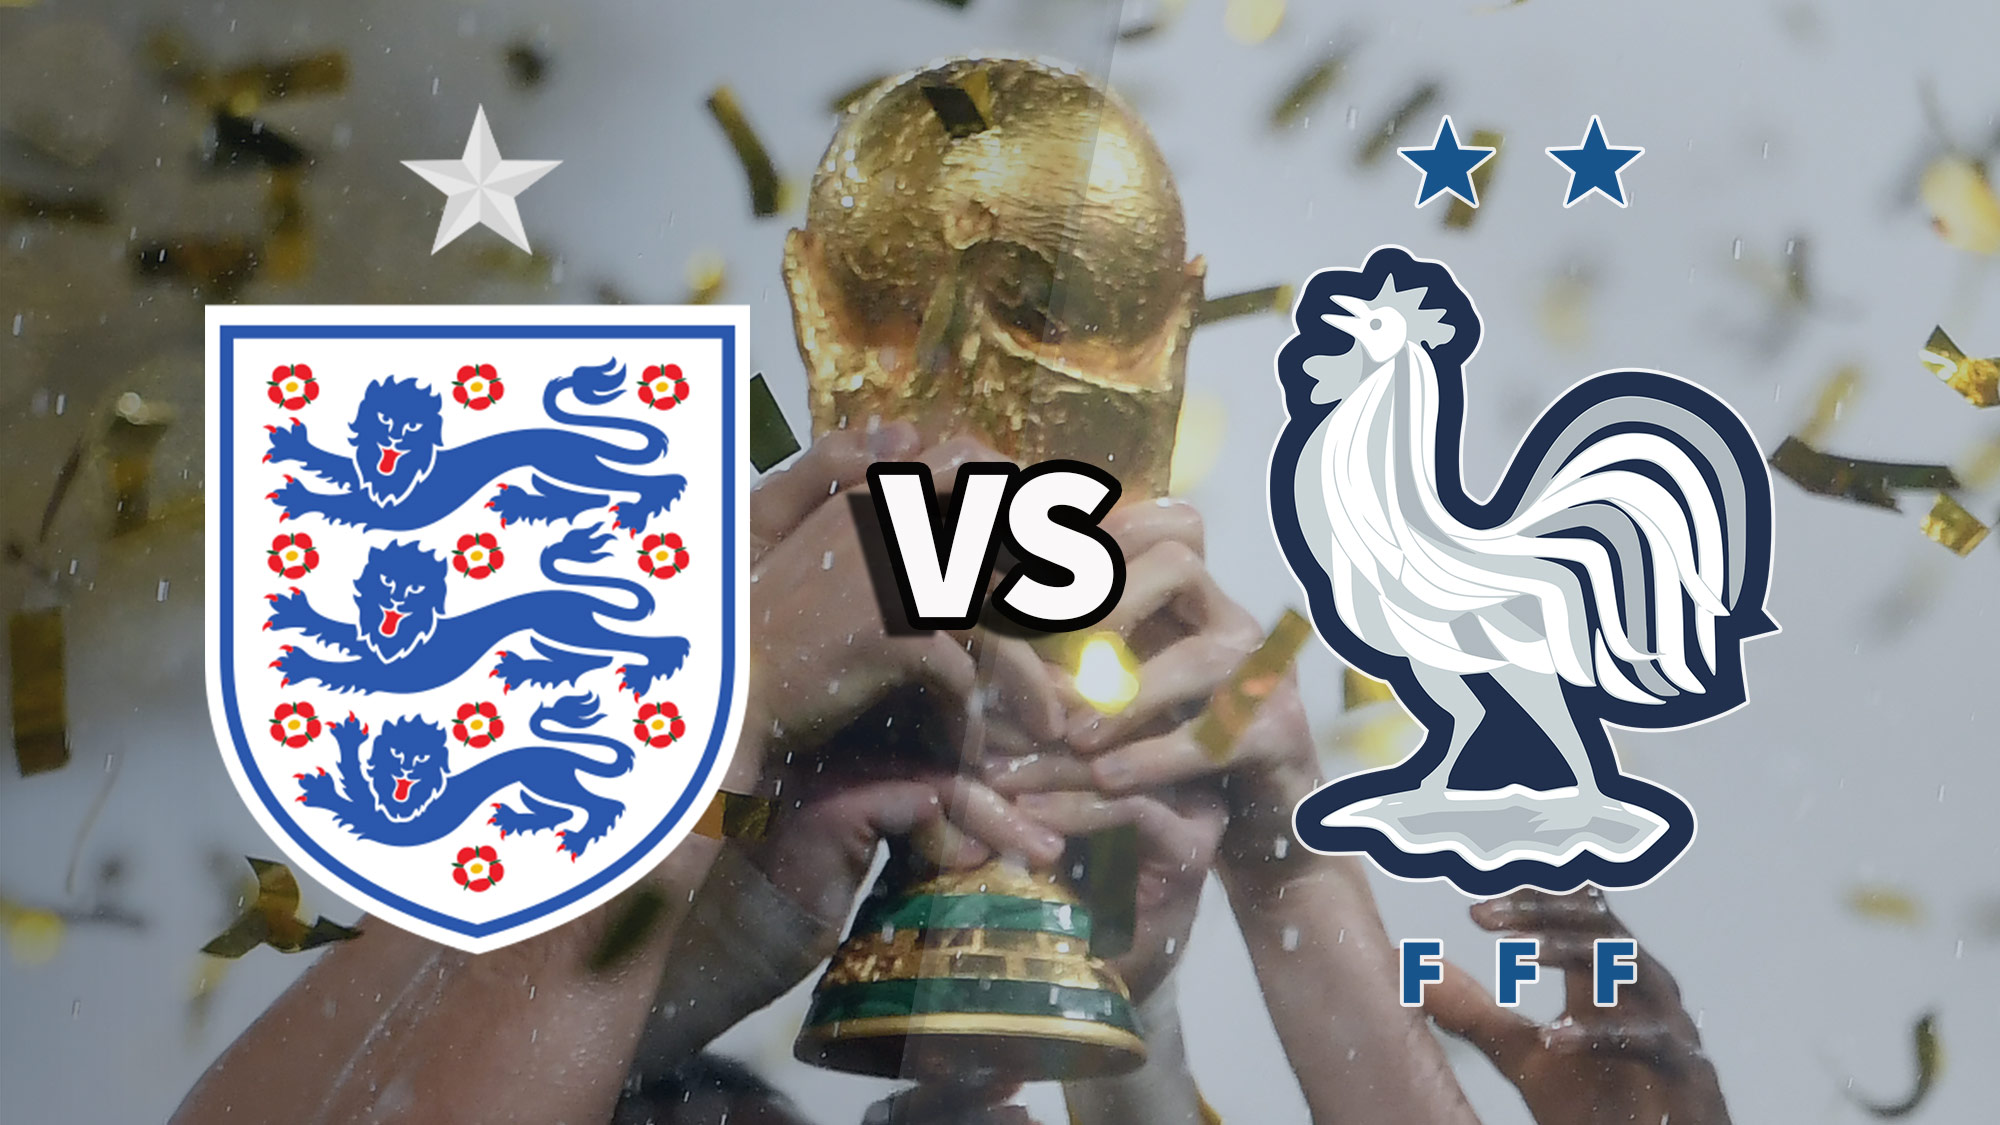 How to watch the England vs France World Cup quarterfinal live stream